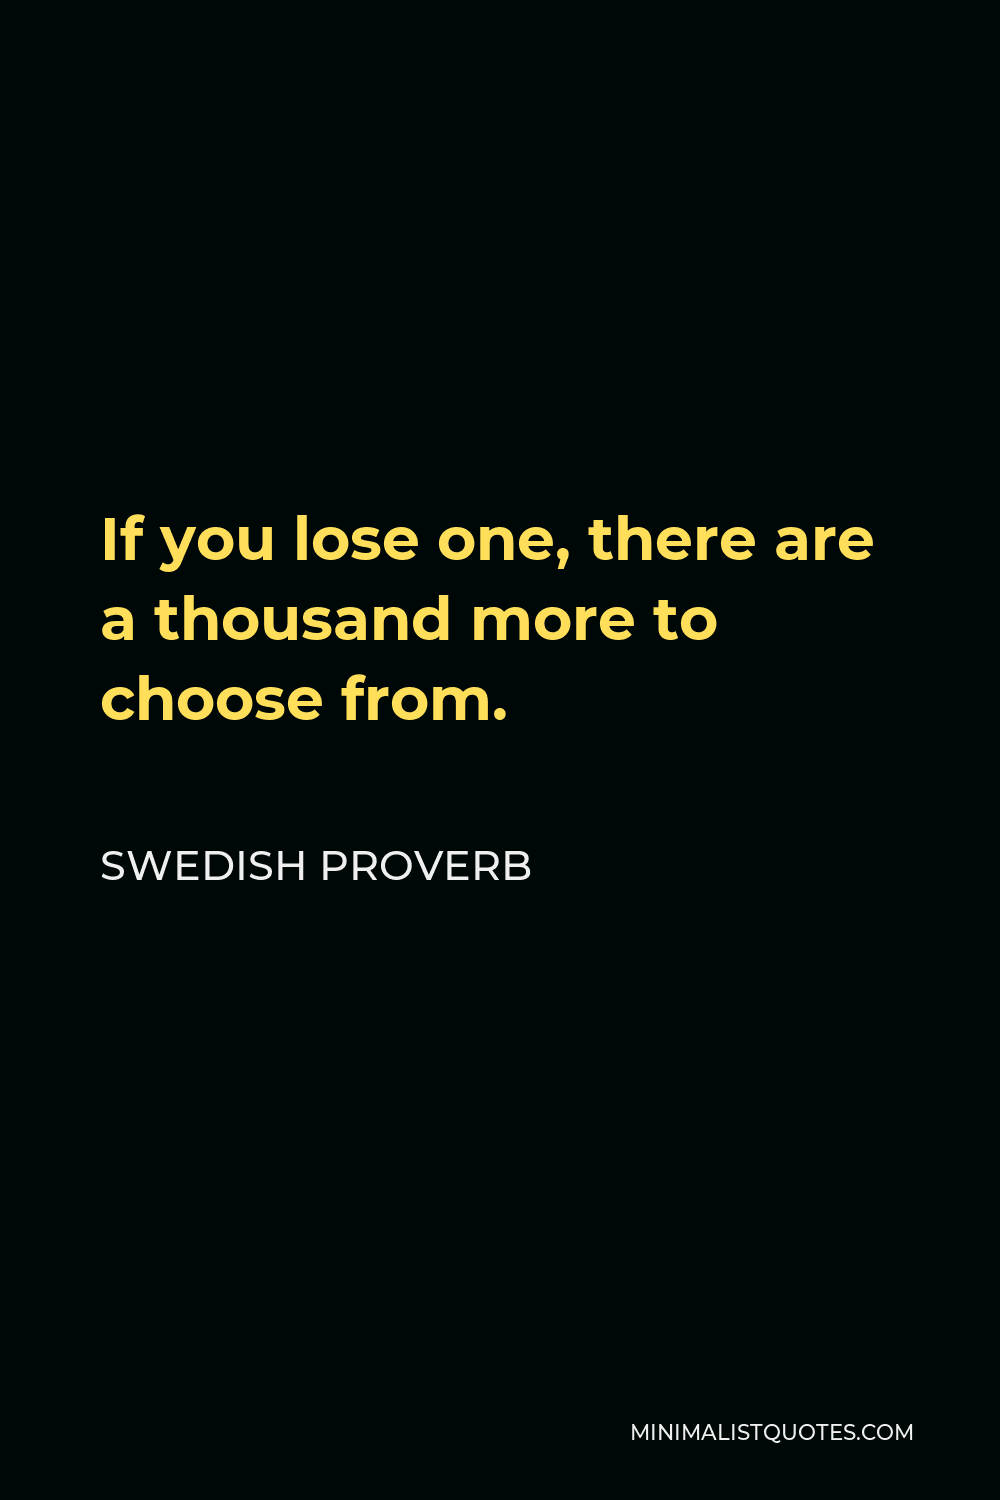 Swedish Proverb Quote - If you lose one, there are a thousand more to choose from.